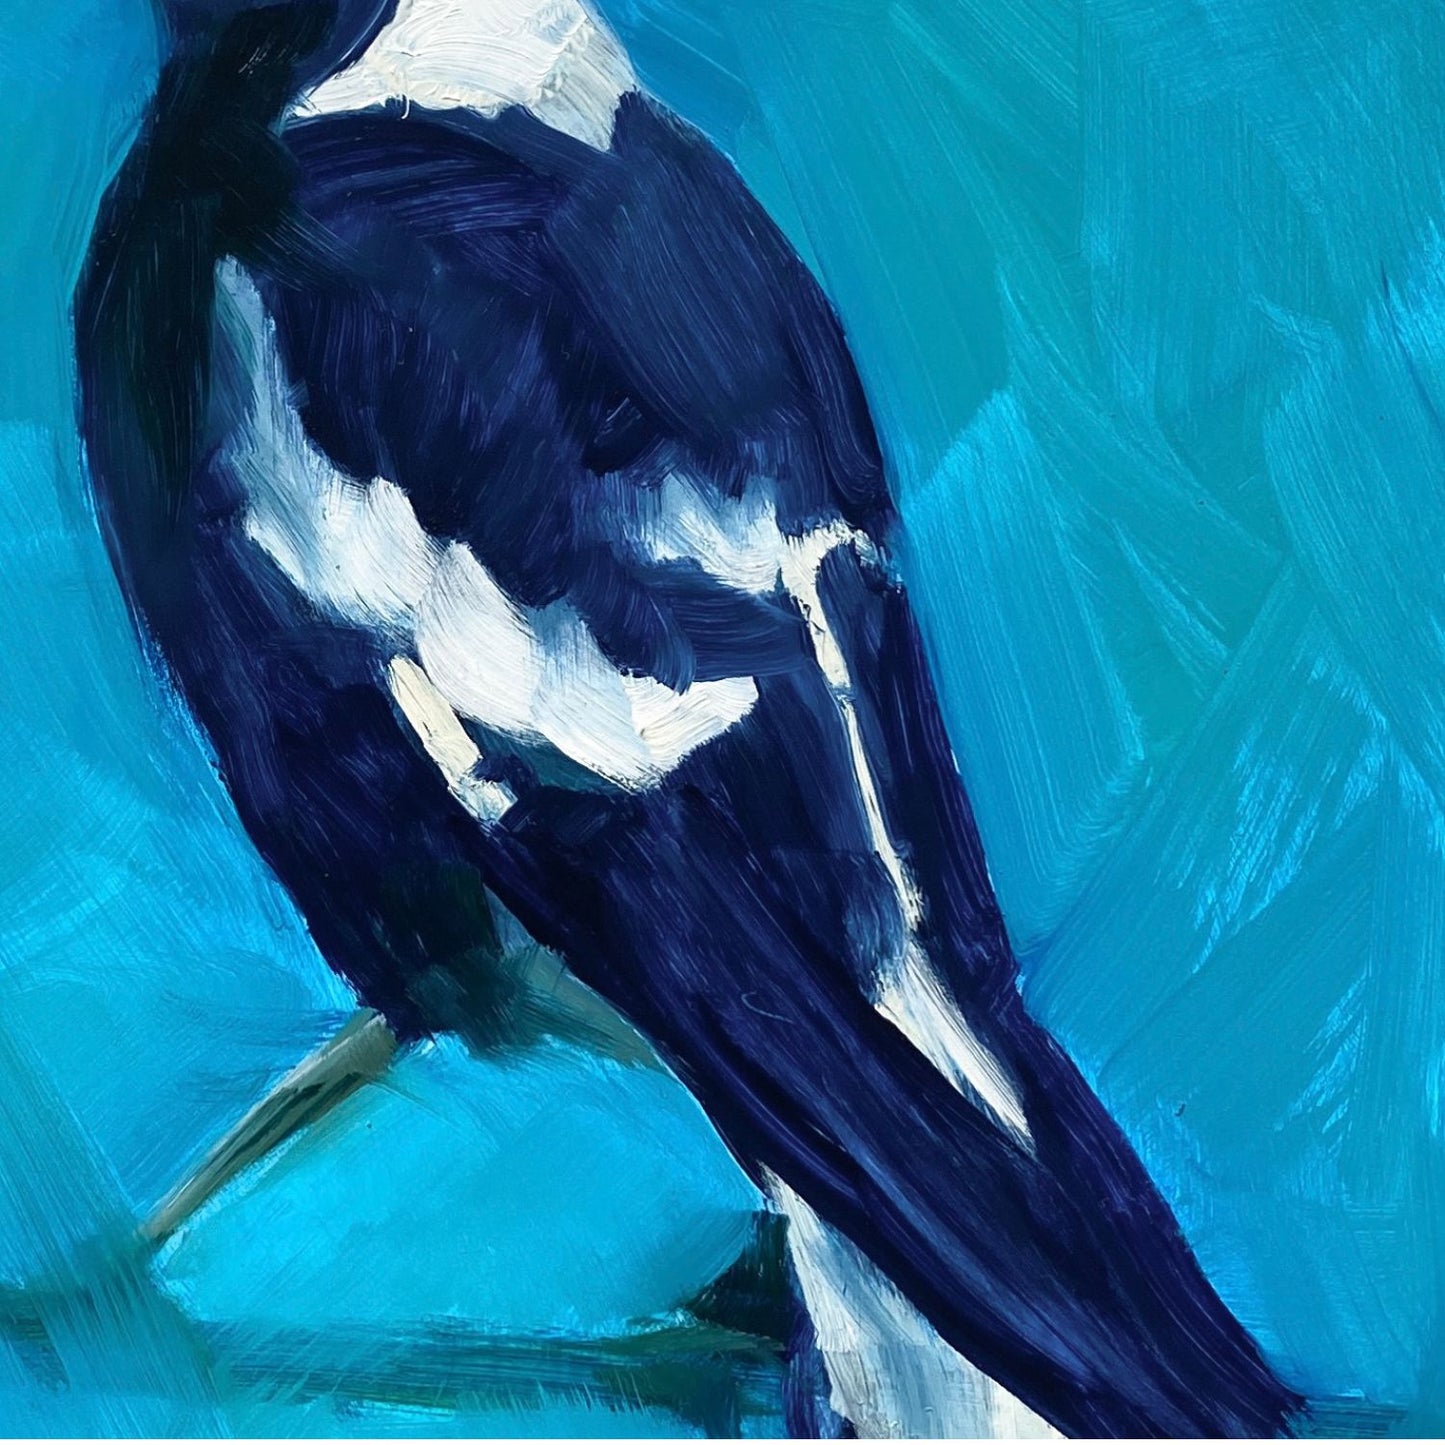 closeup of an original oil painting of the profile of a navy blue and white magpie on a textured turquoise background